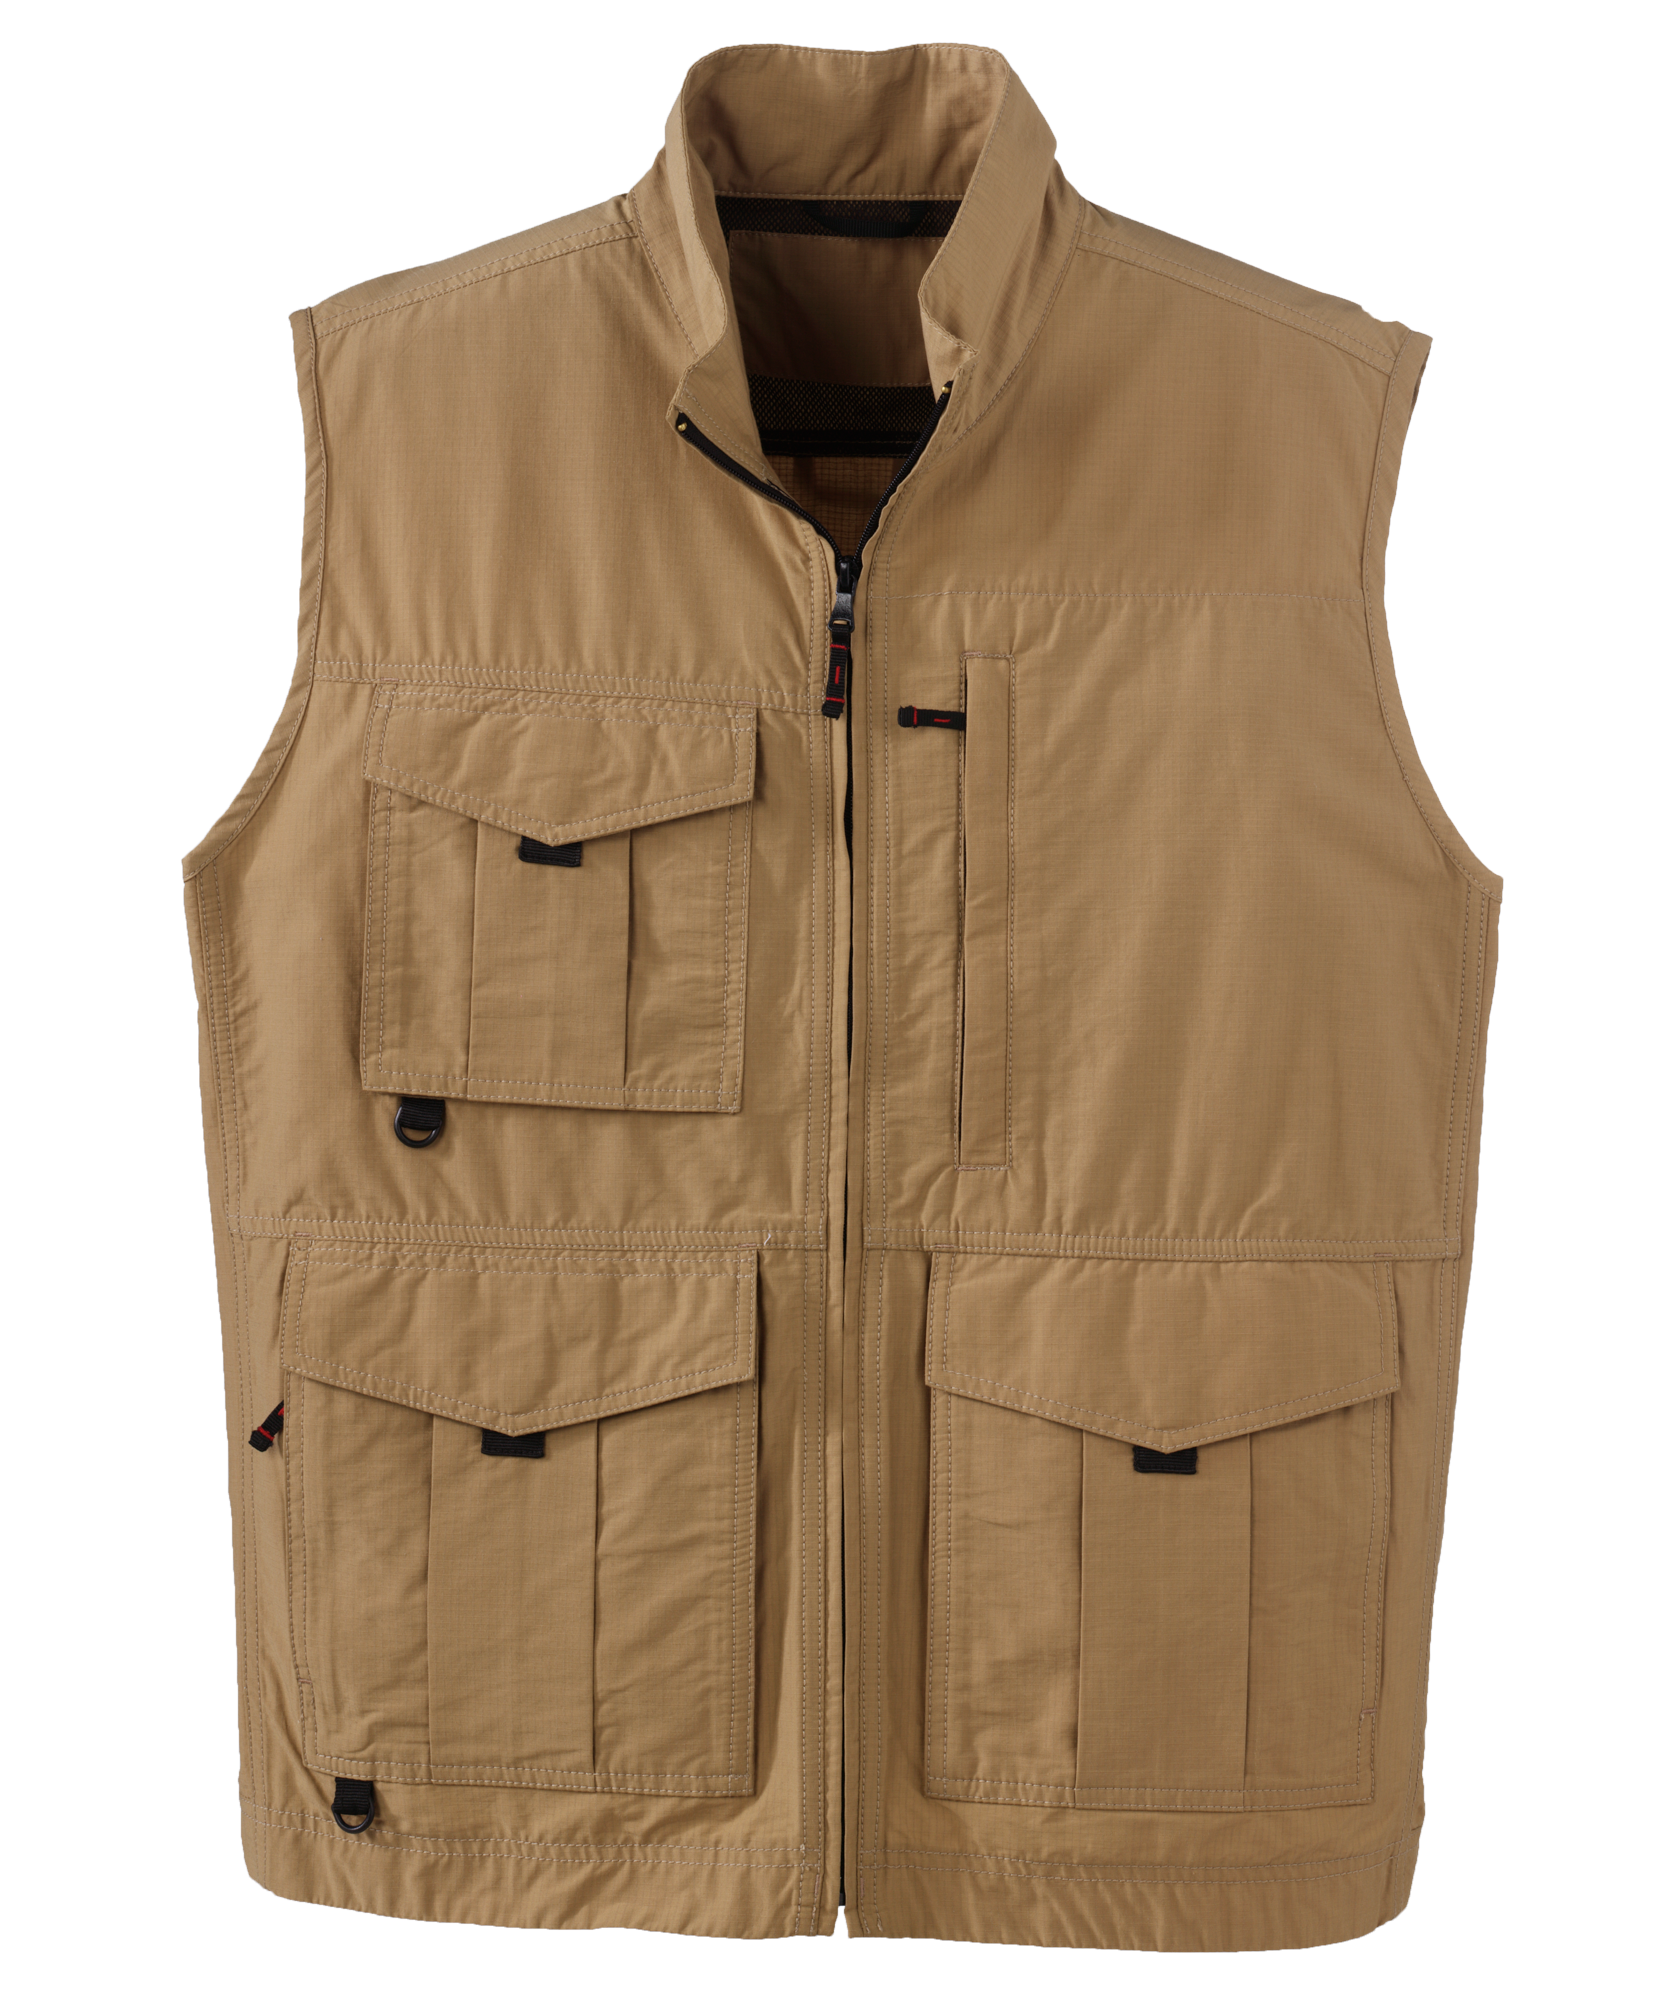 RedHead Ripstop Utility Vests for Men